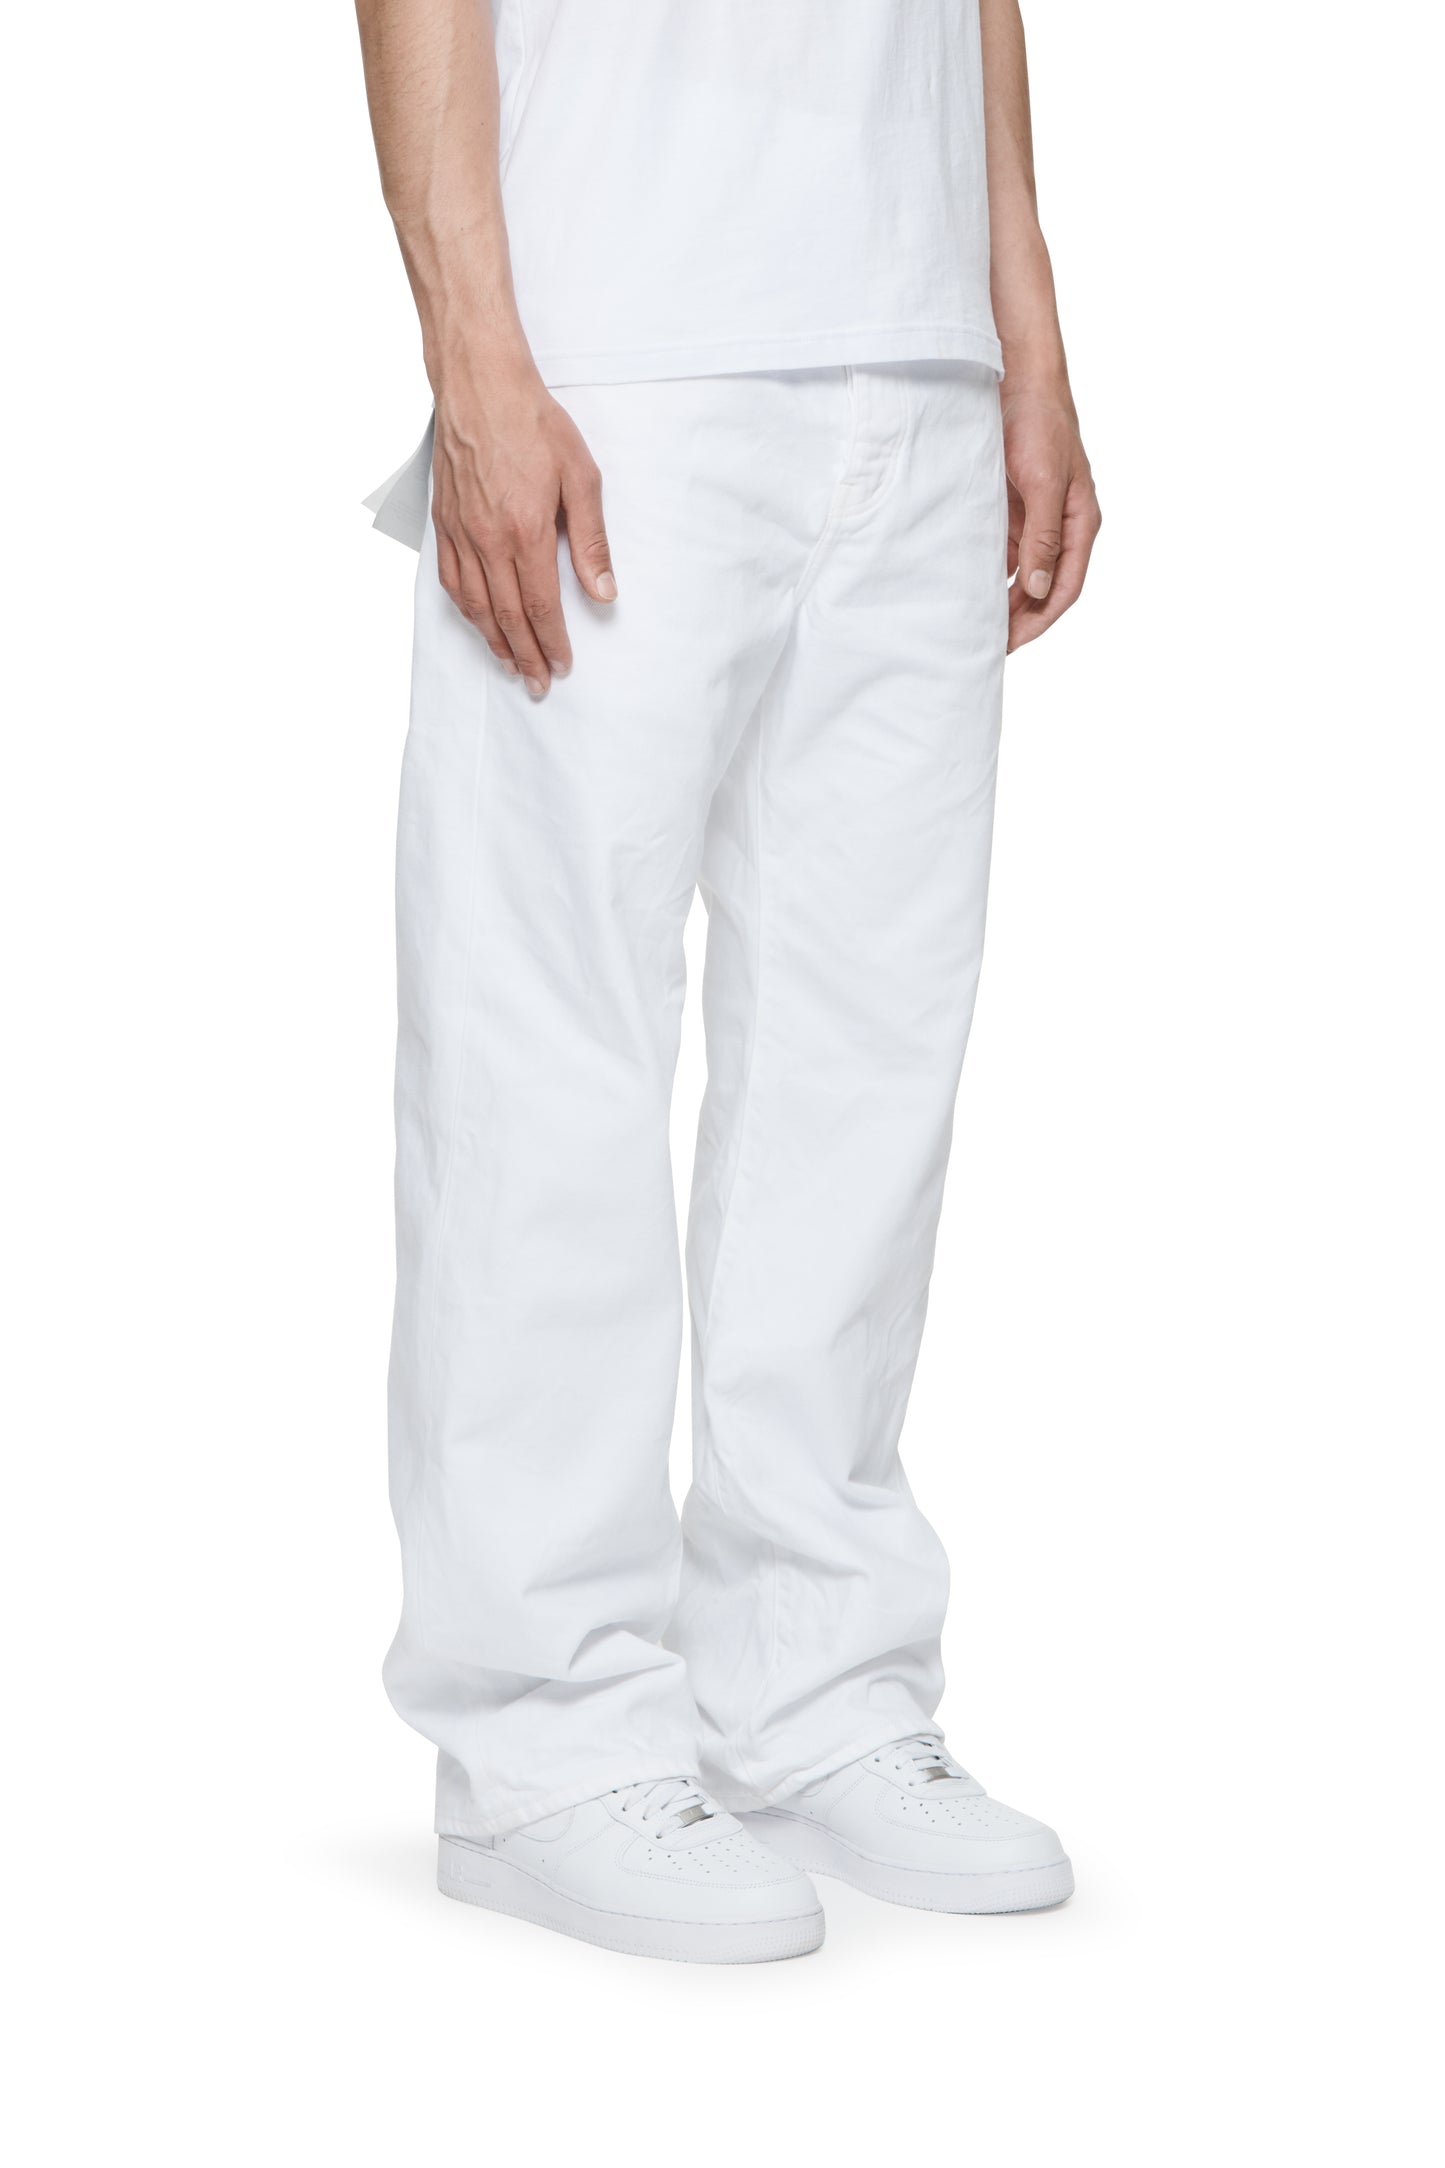 P018 Optic White Baggy Jeans